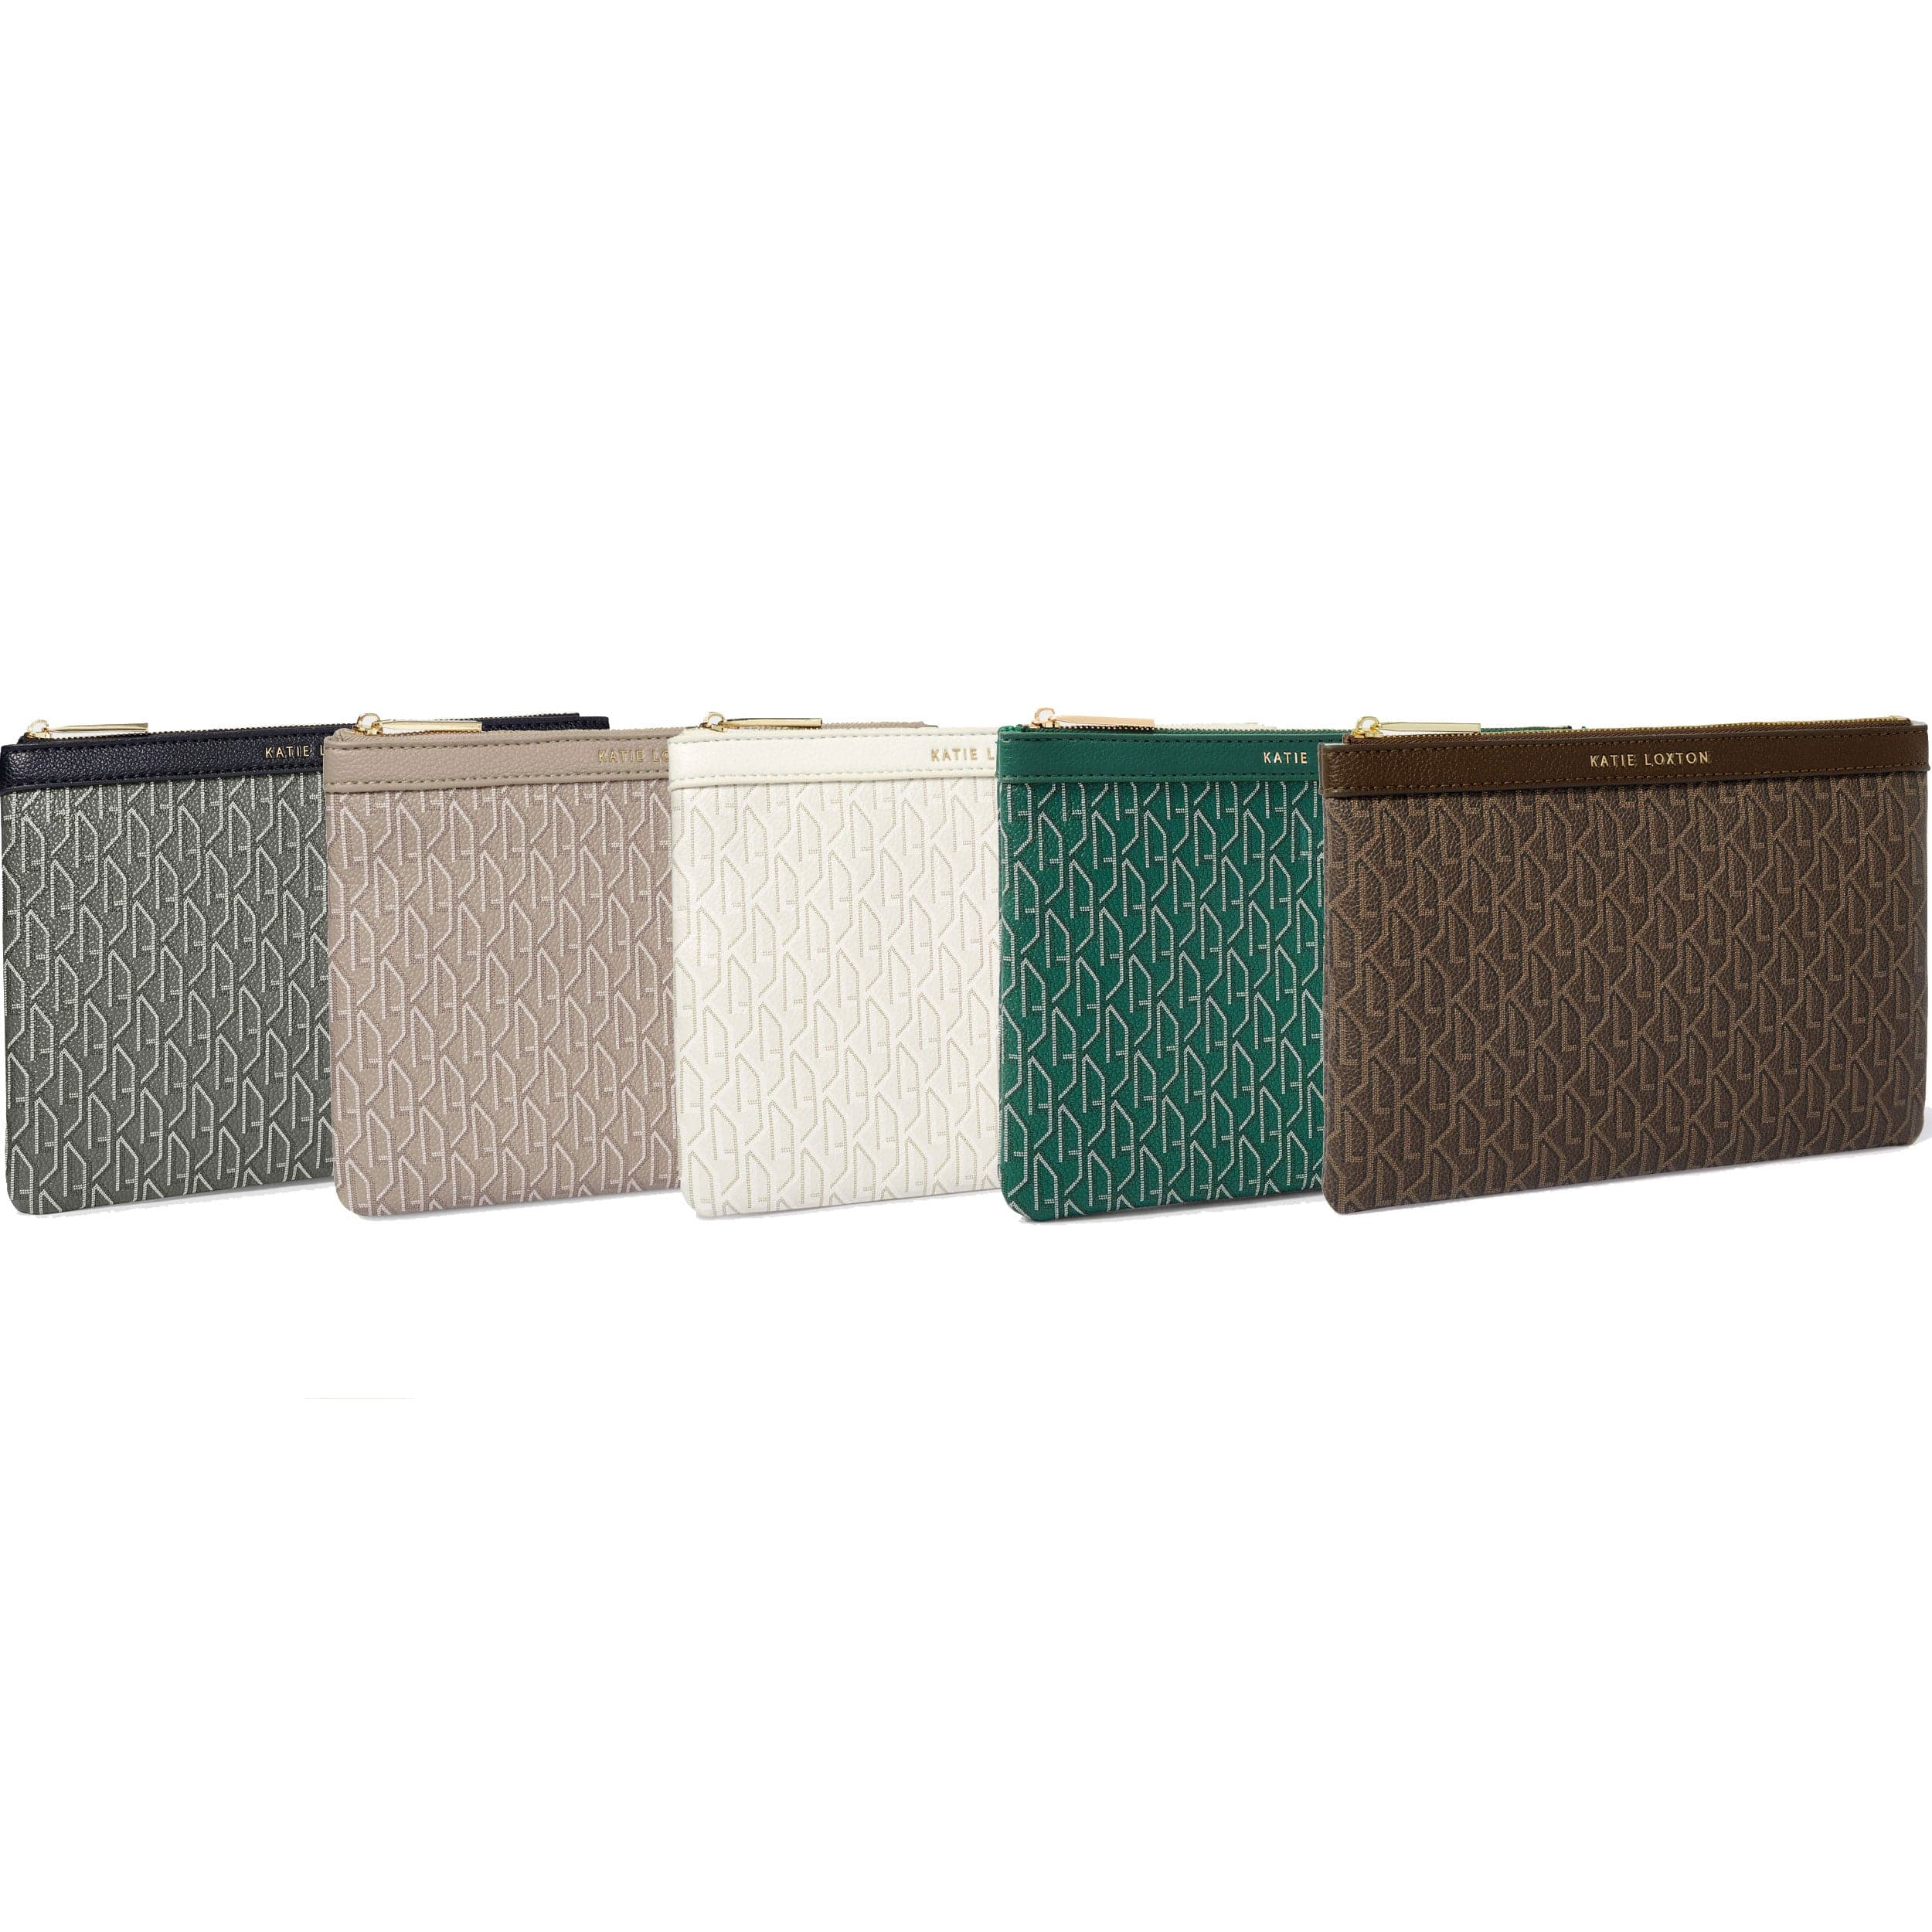 Katie Loxton Pouch Katie Loxton Signature Pouch - Black / Taupe / Off White / Emerald Green / Chocolate